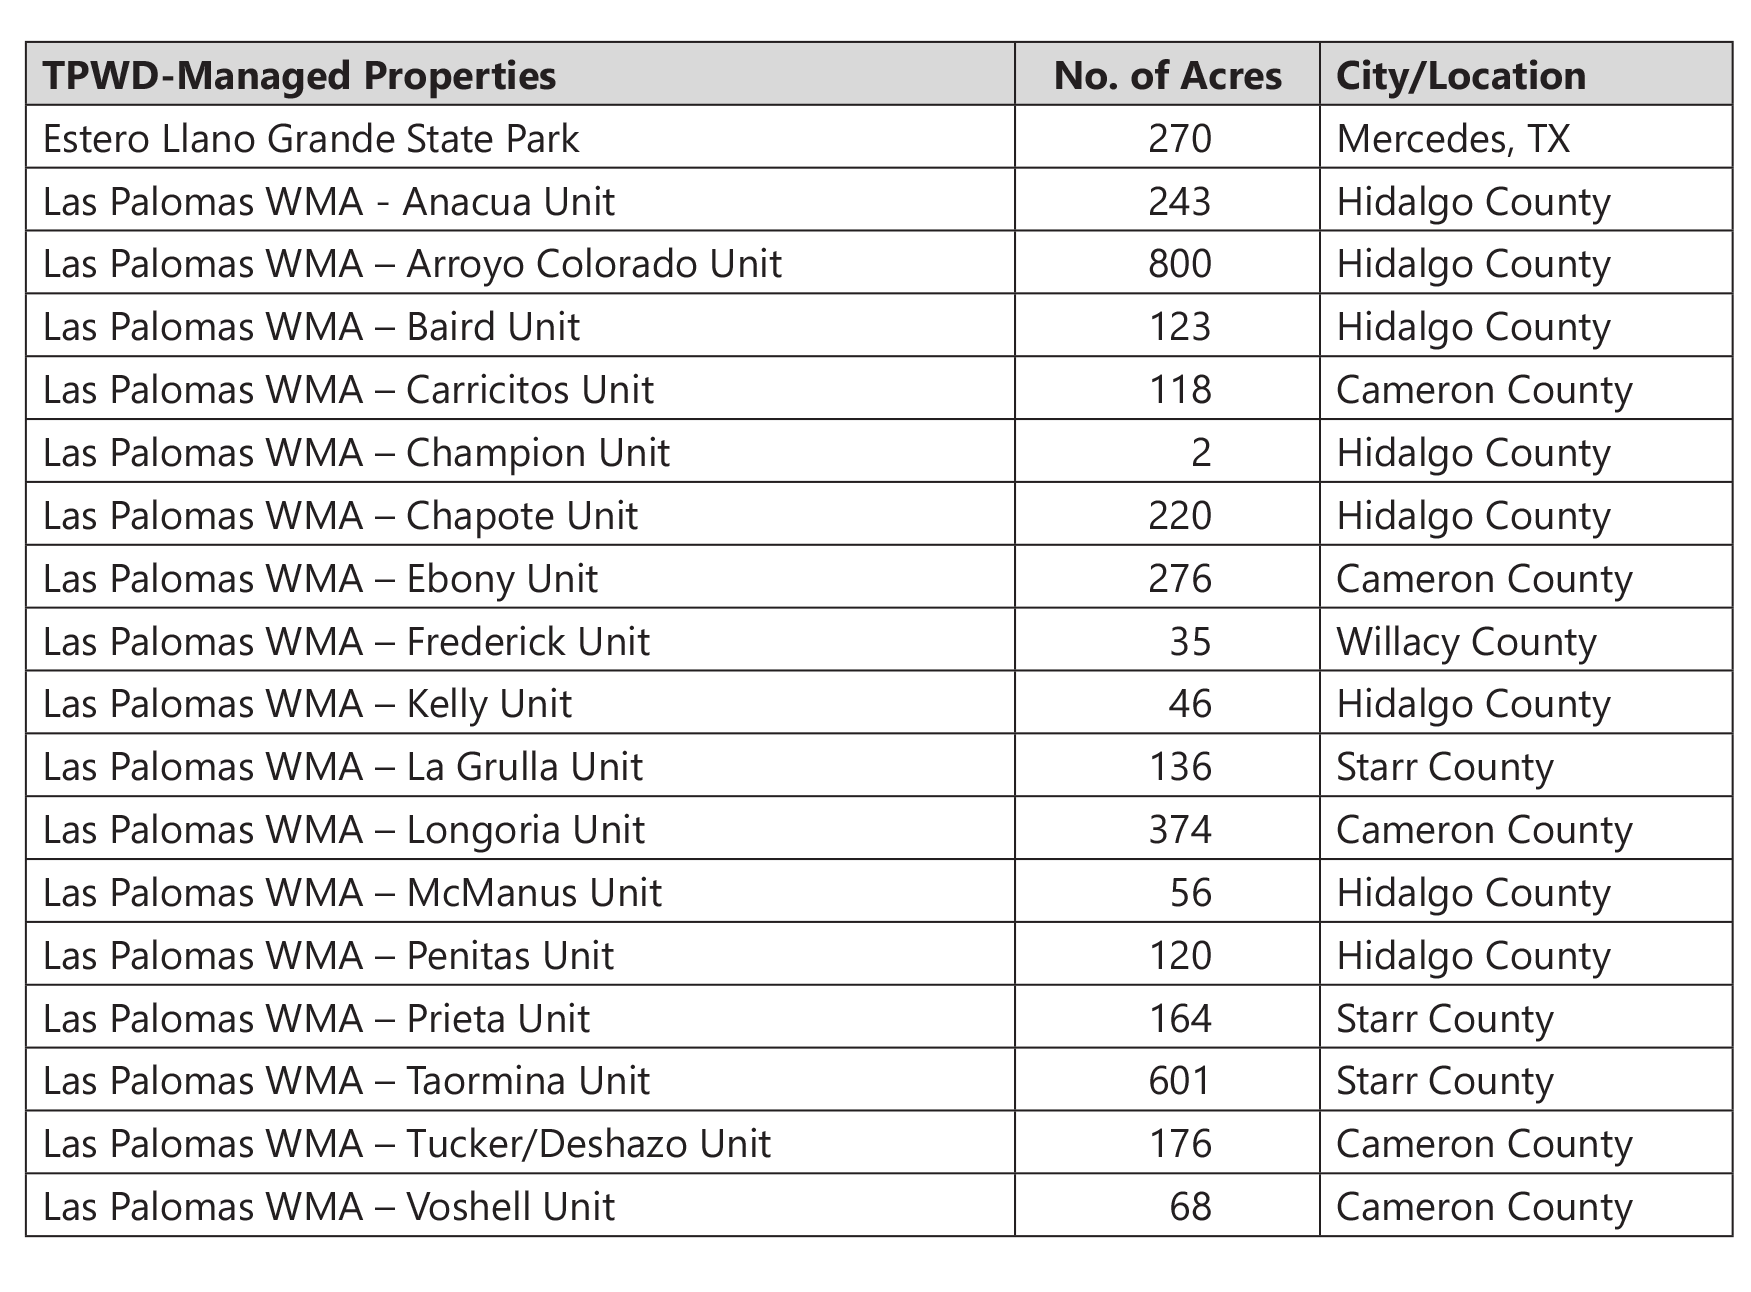 Table 3.1. TPWD-managed properties/acreage